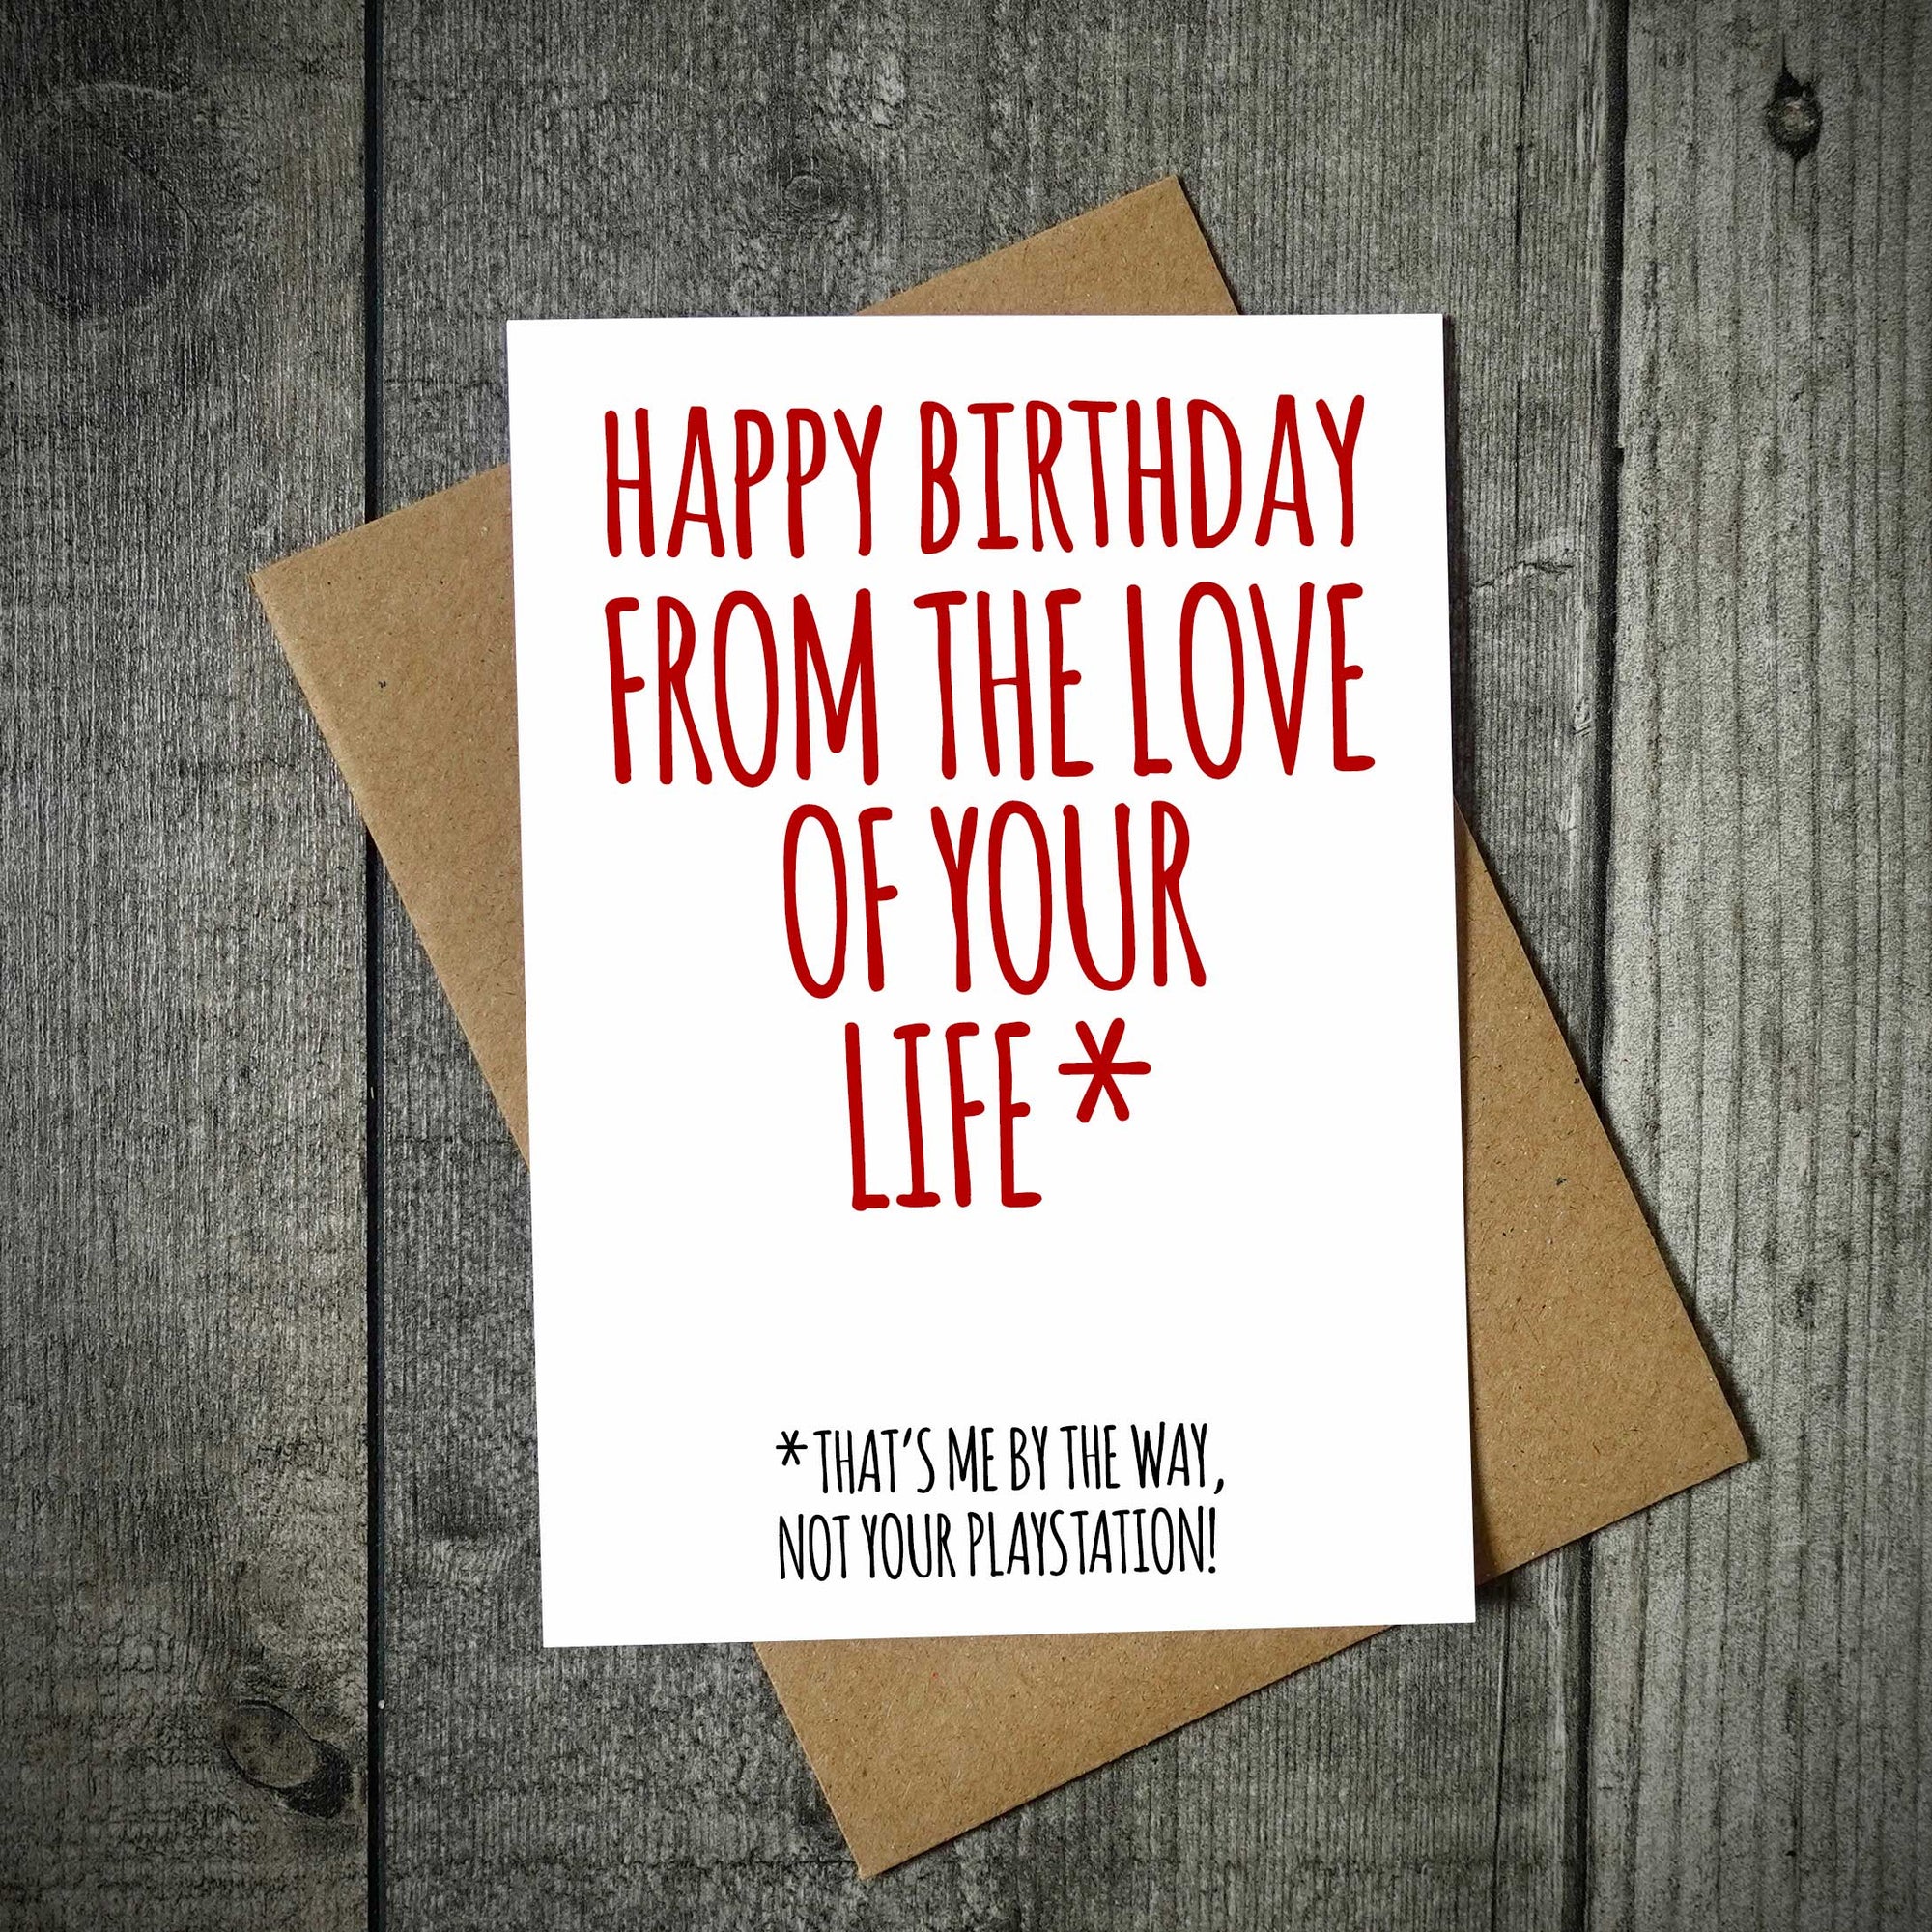 Happy Birthday From The Love Of Your Life Funny Birthday Card - Playstation